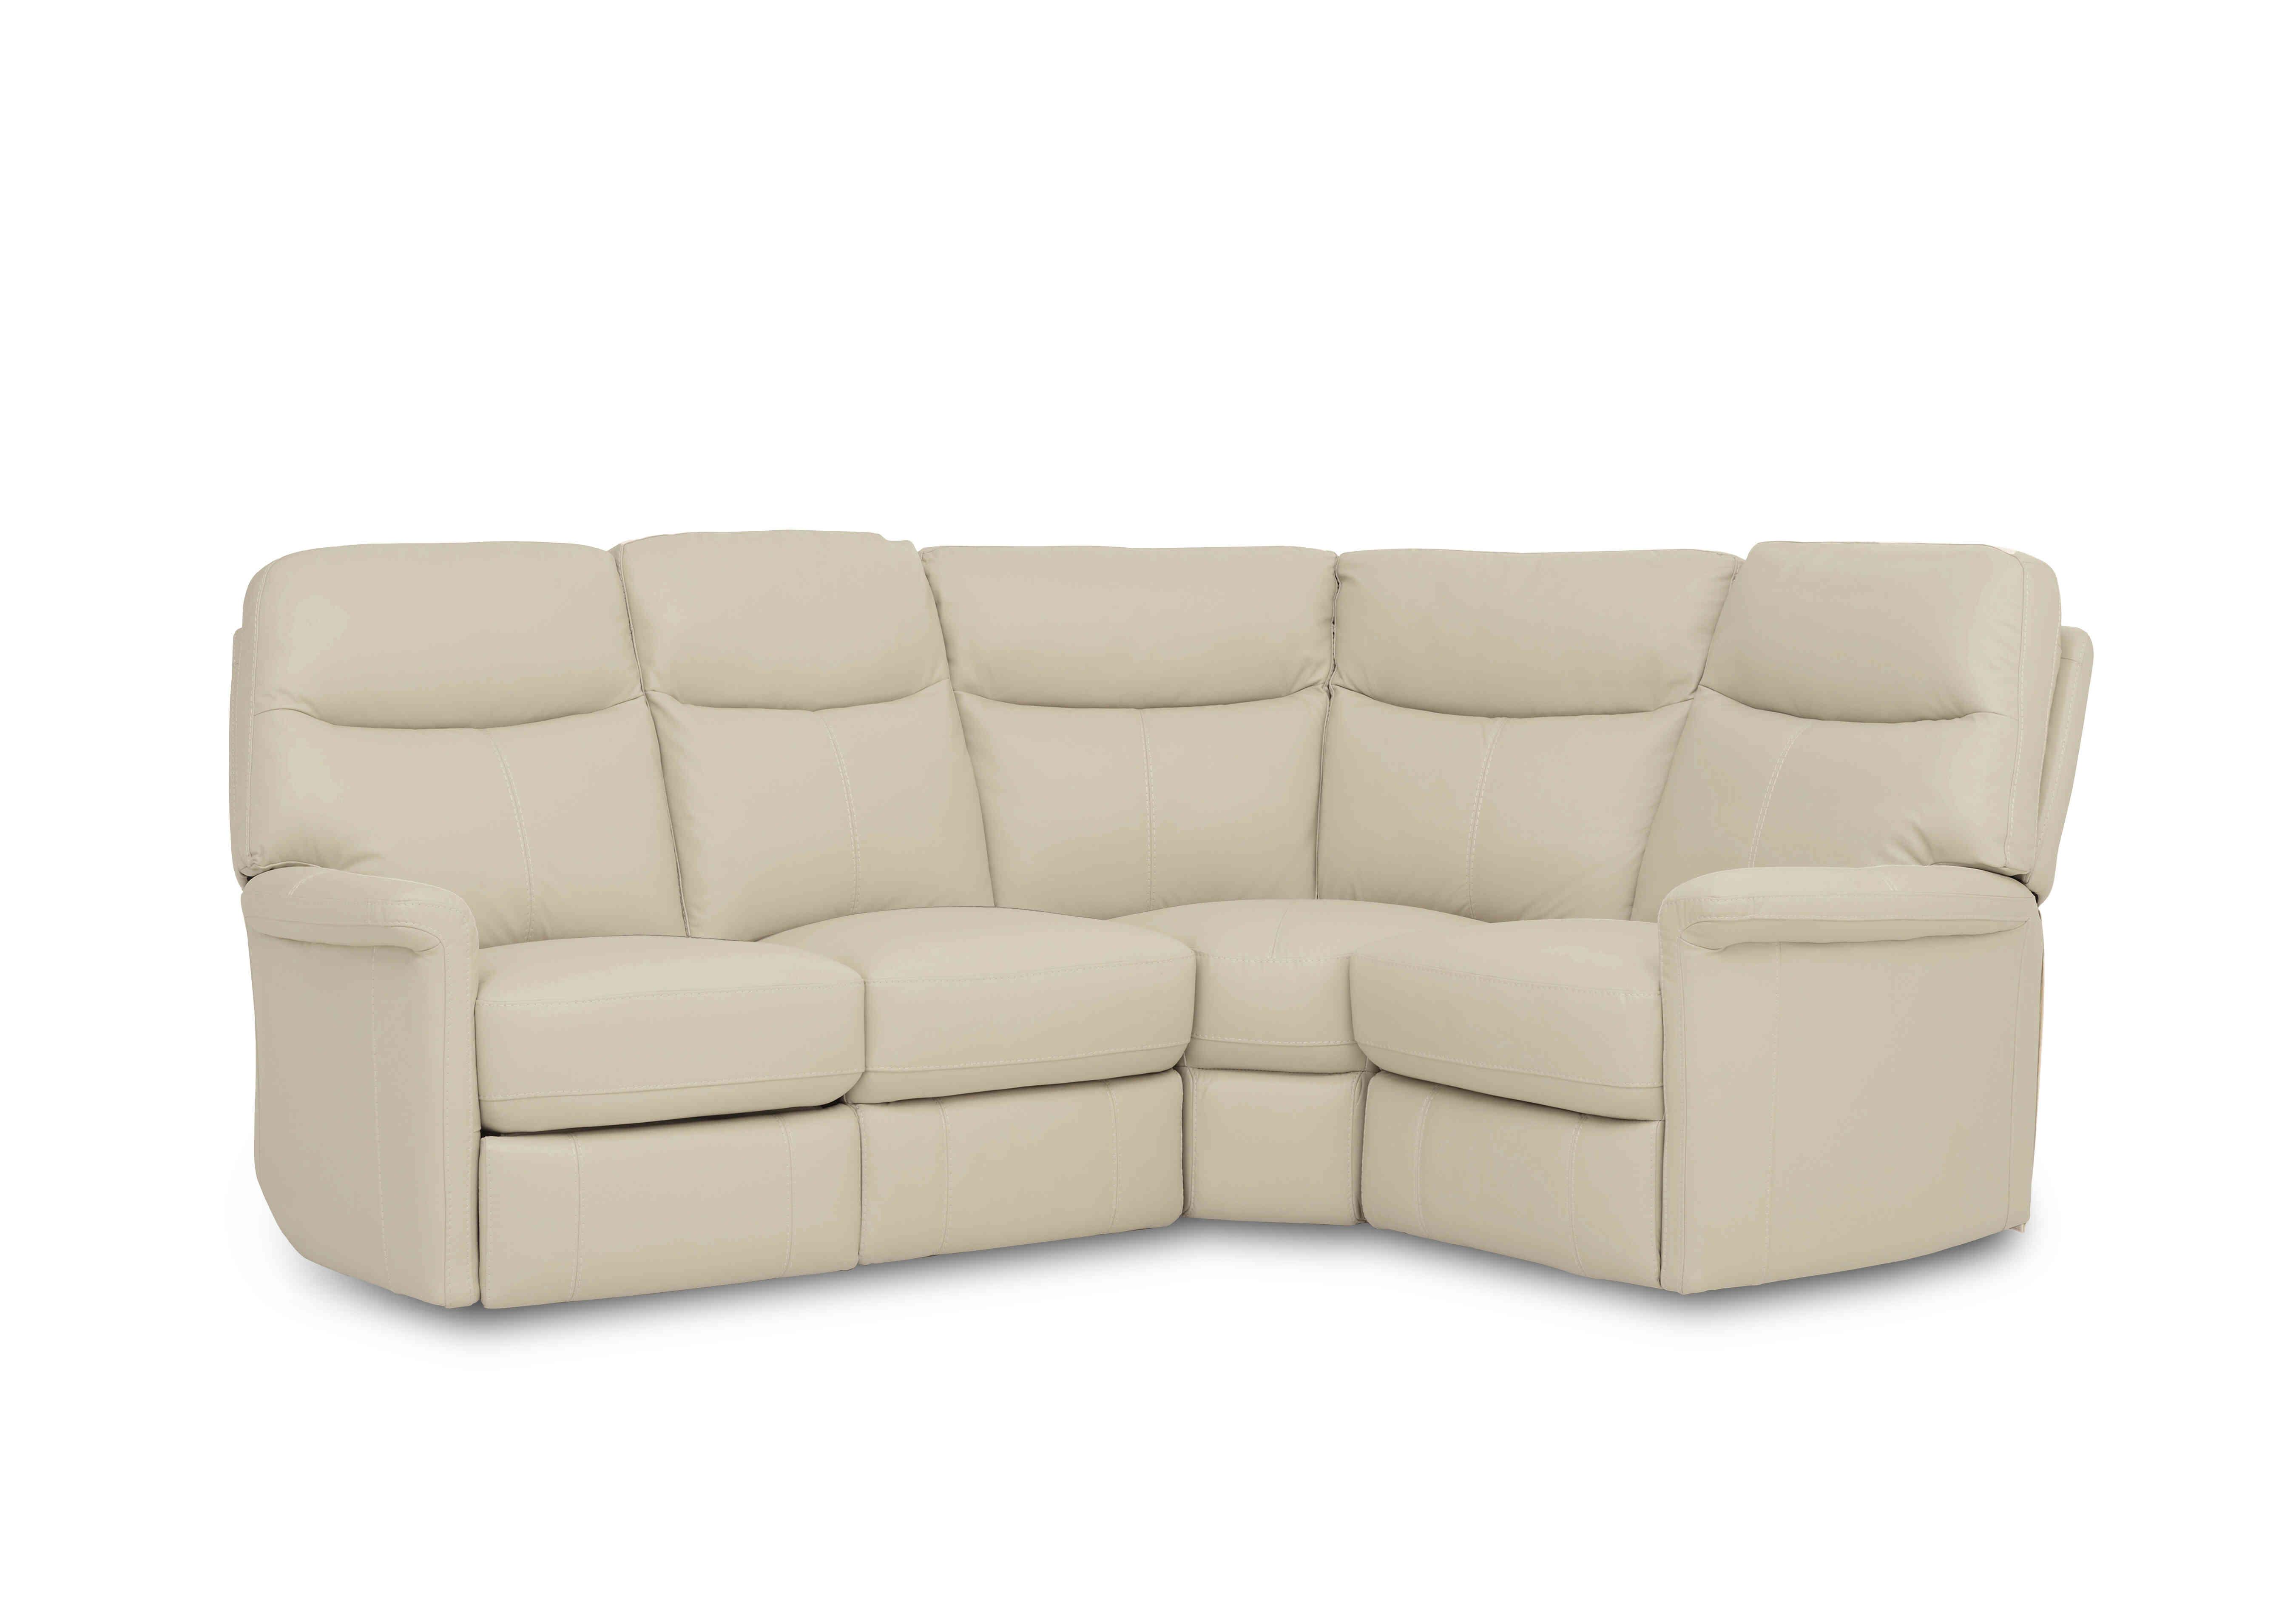 Compact Collection Lille Leather Corner Sofa in Bv-862c Bisque on Furniture Village